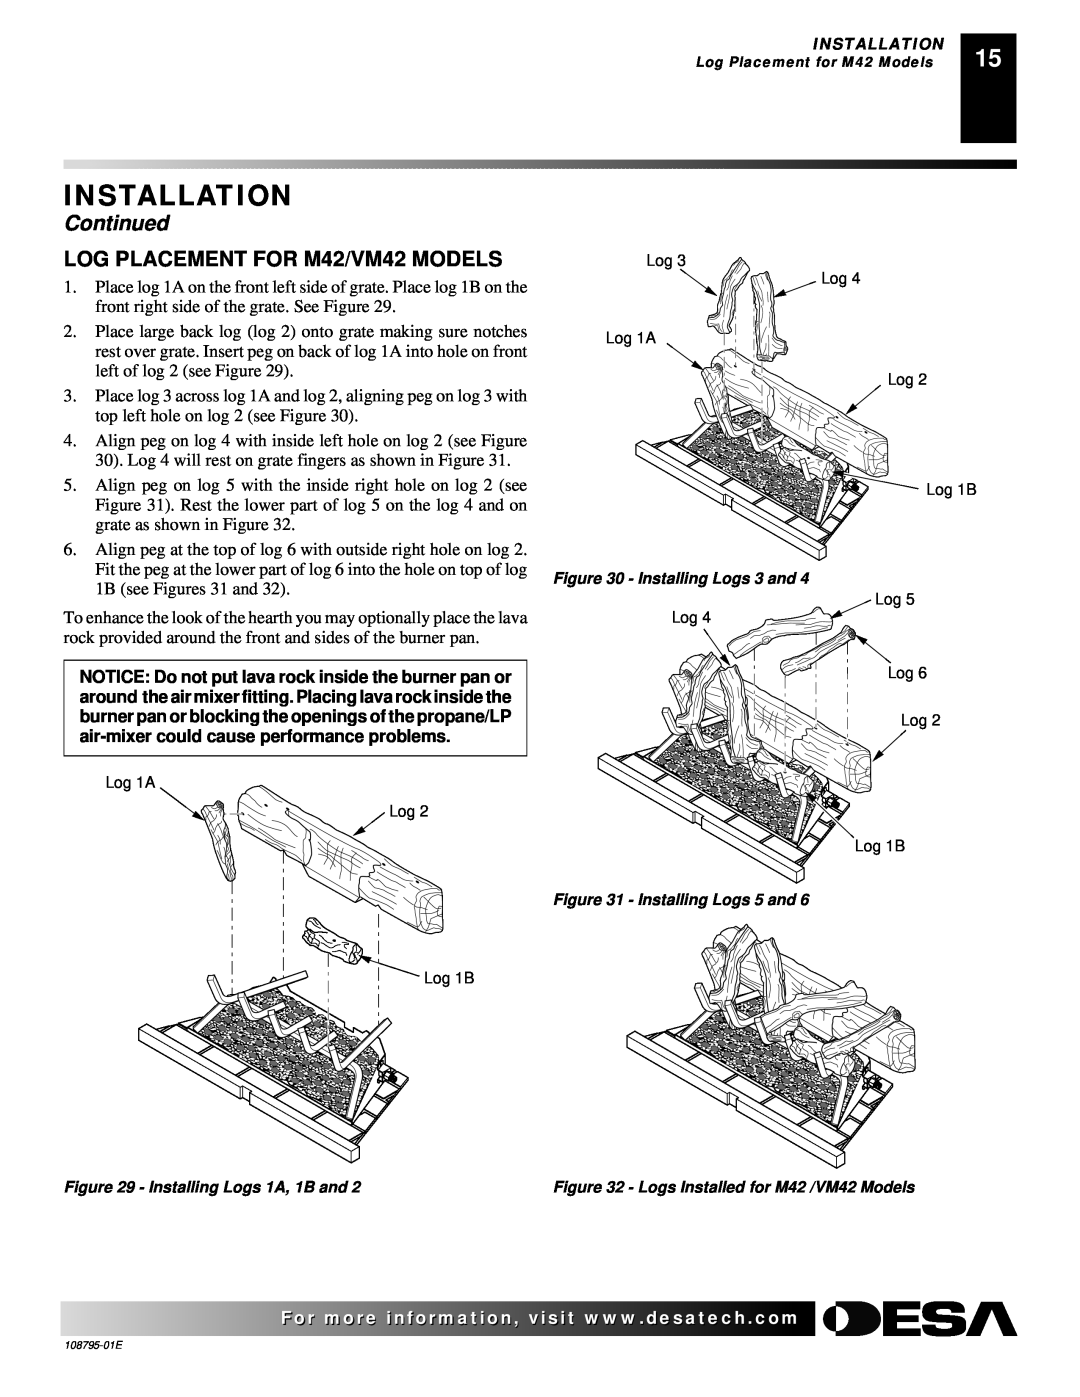 Desa M36 installation manual Installation, Continued, LOG PLACEMENT FOR M42/VM42 MODELS 